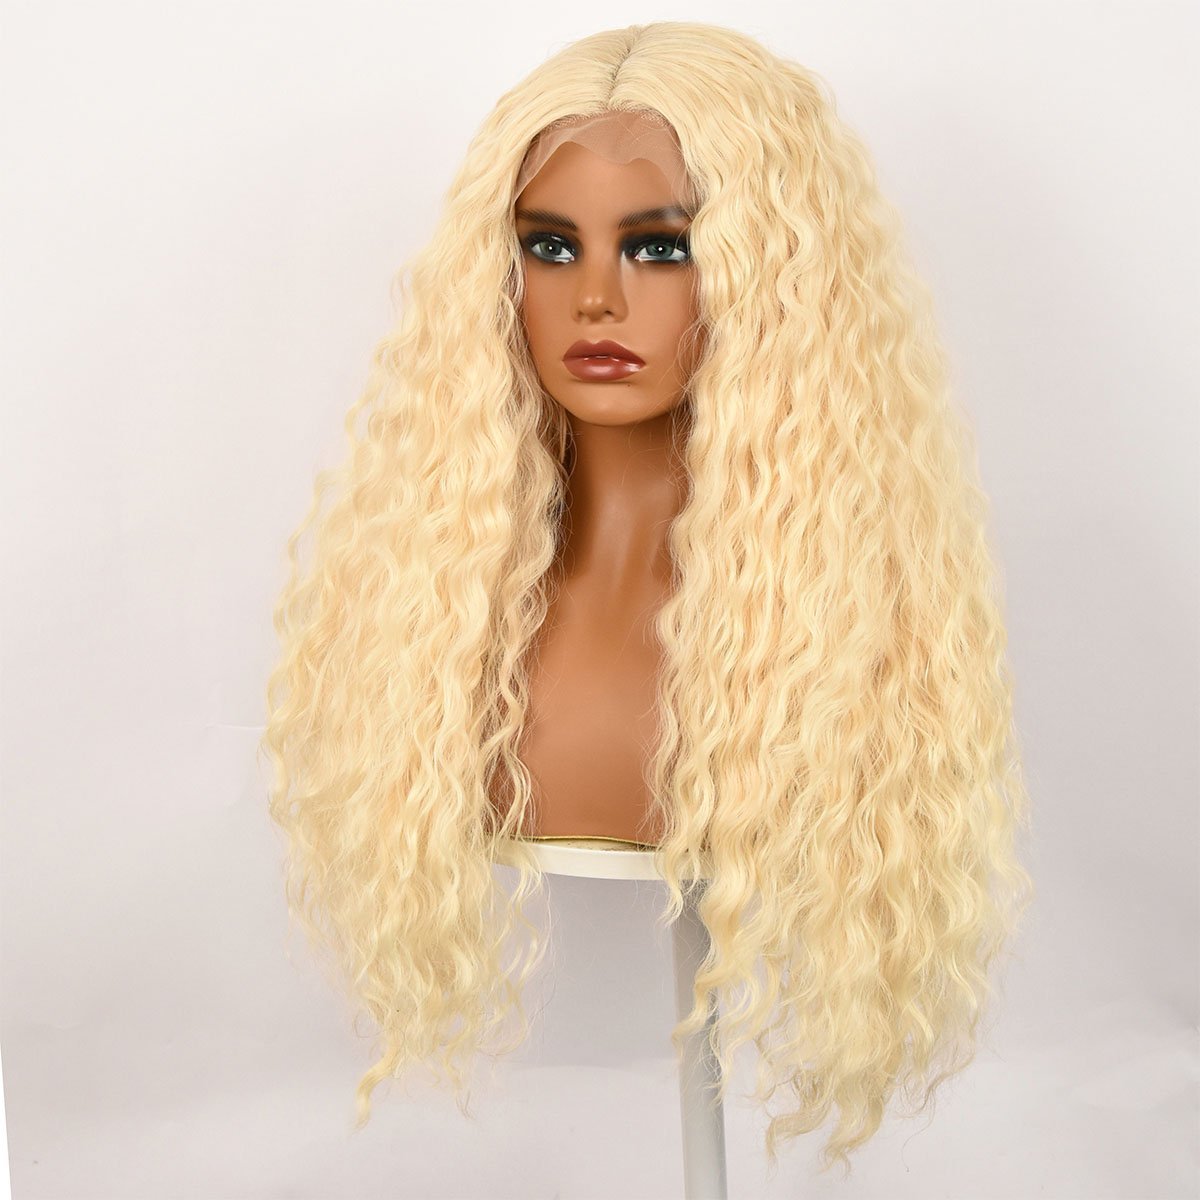 28 Inches | Blonde | Daily Style | Curly Hair without Bangs | Synthetic Lace Front |SML721 - TapLike